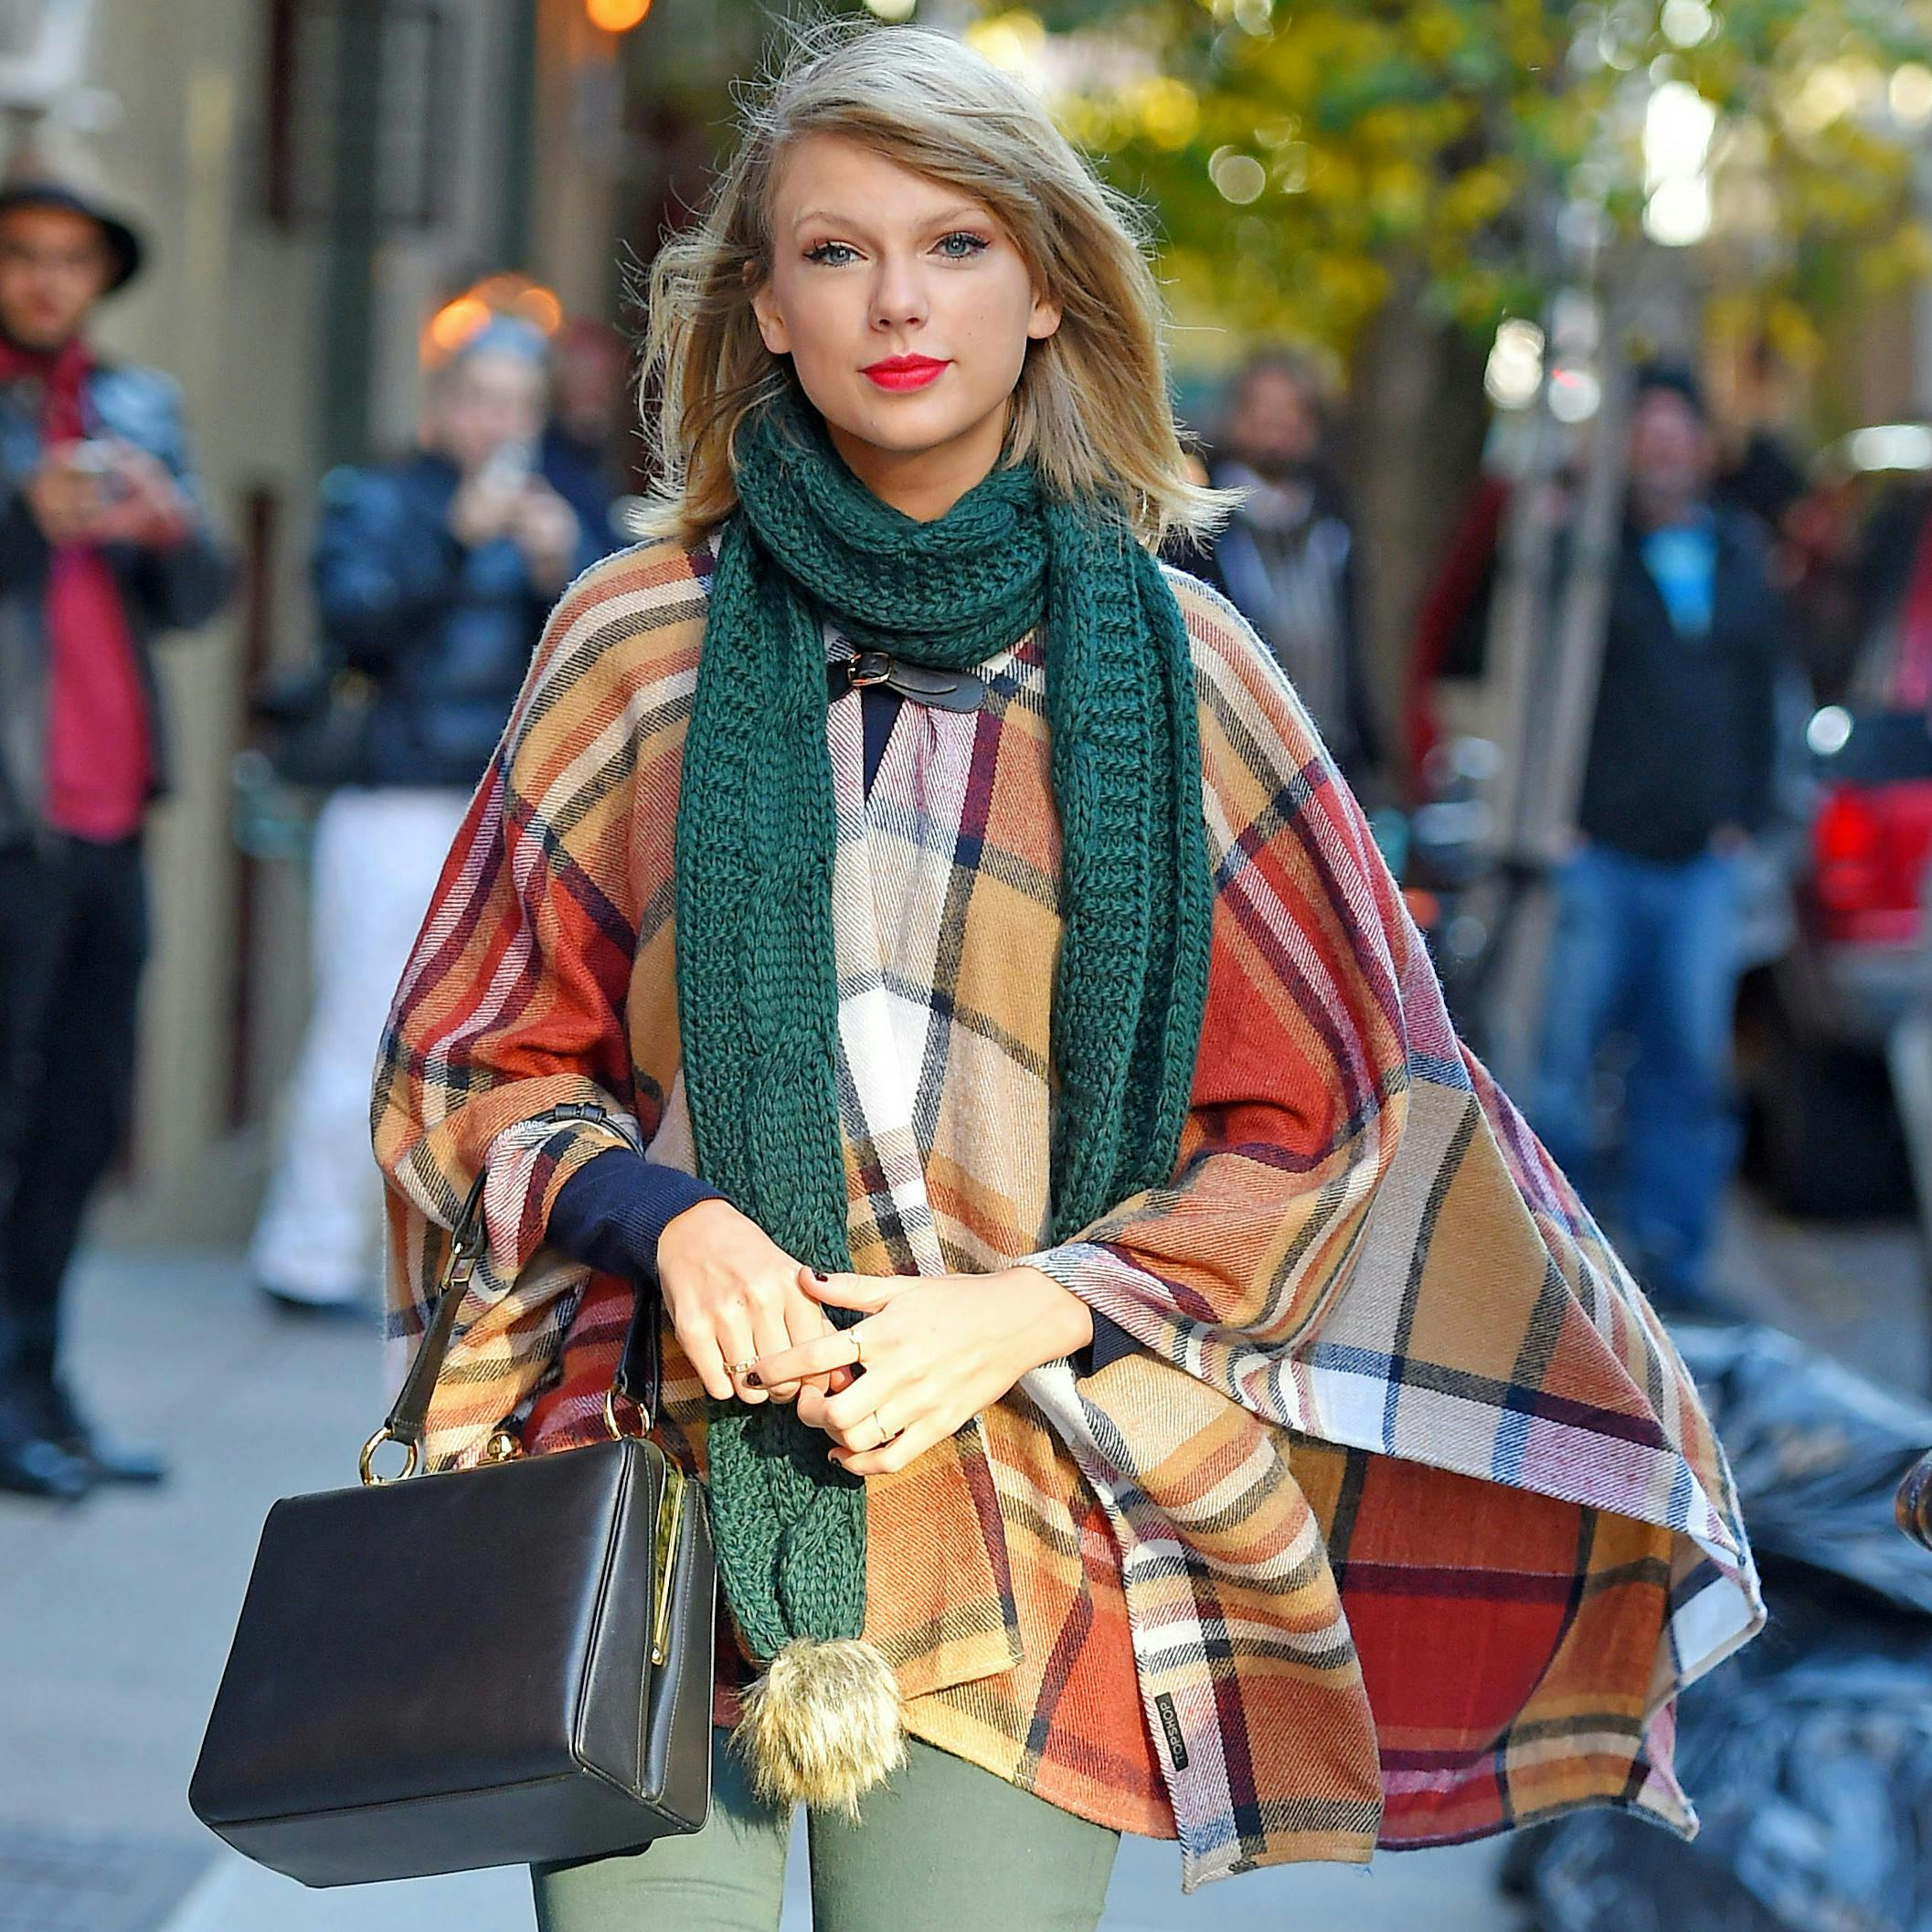 plaid thin blanket new york city taylor swift green trousers pattern new york state mid-atlantic usa north america person human clothing apparel handbag accessories bag accessory purse